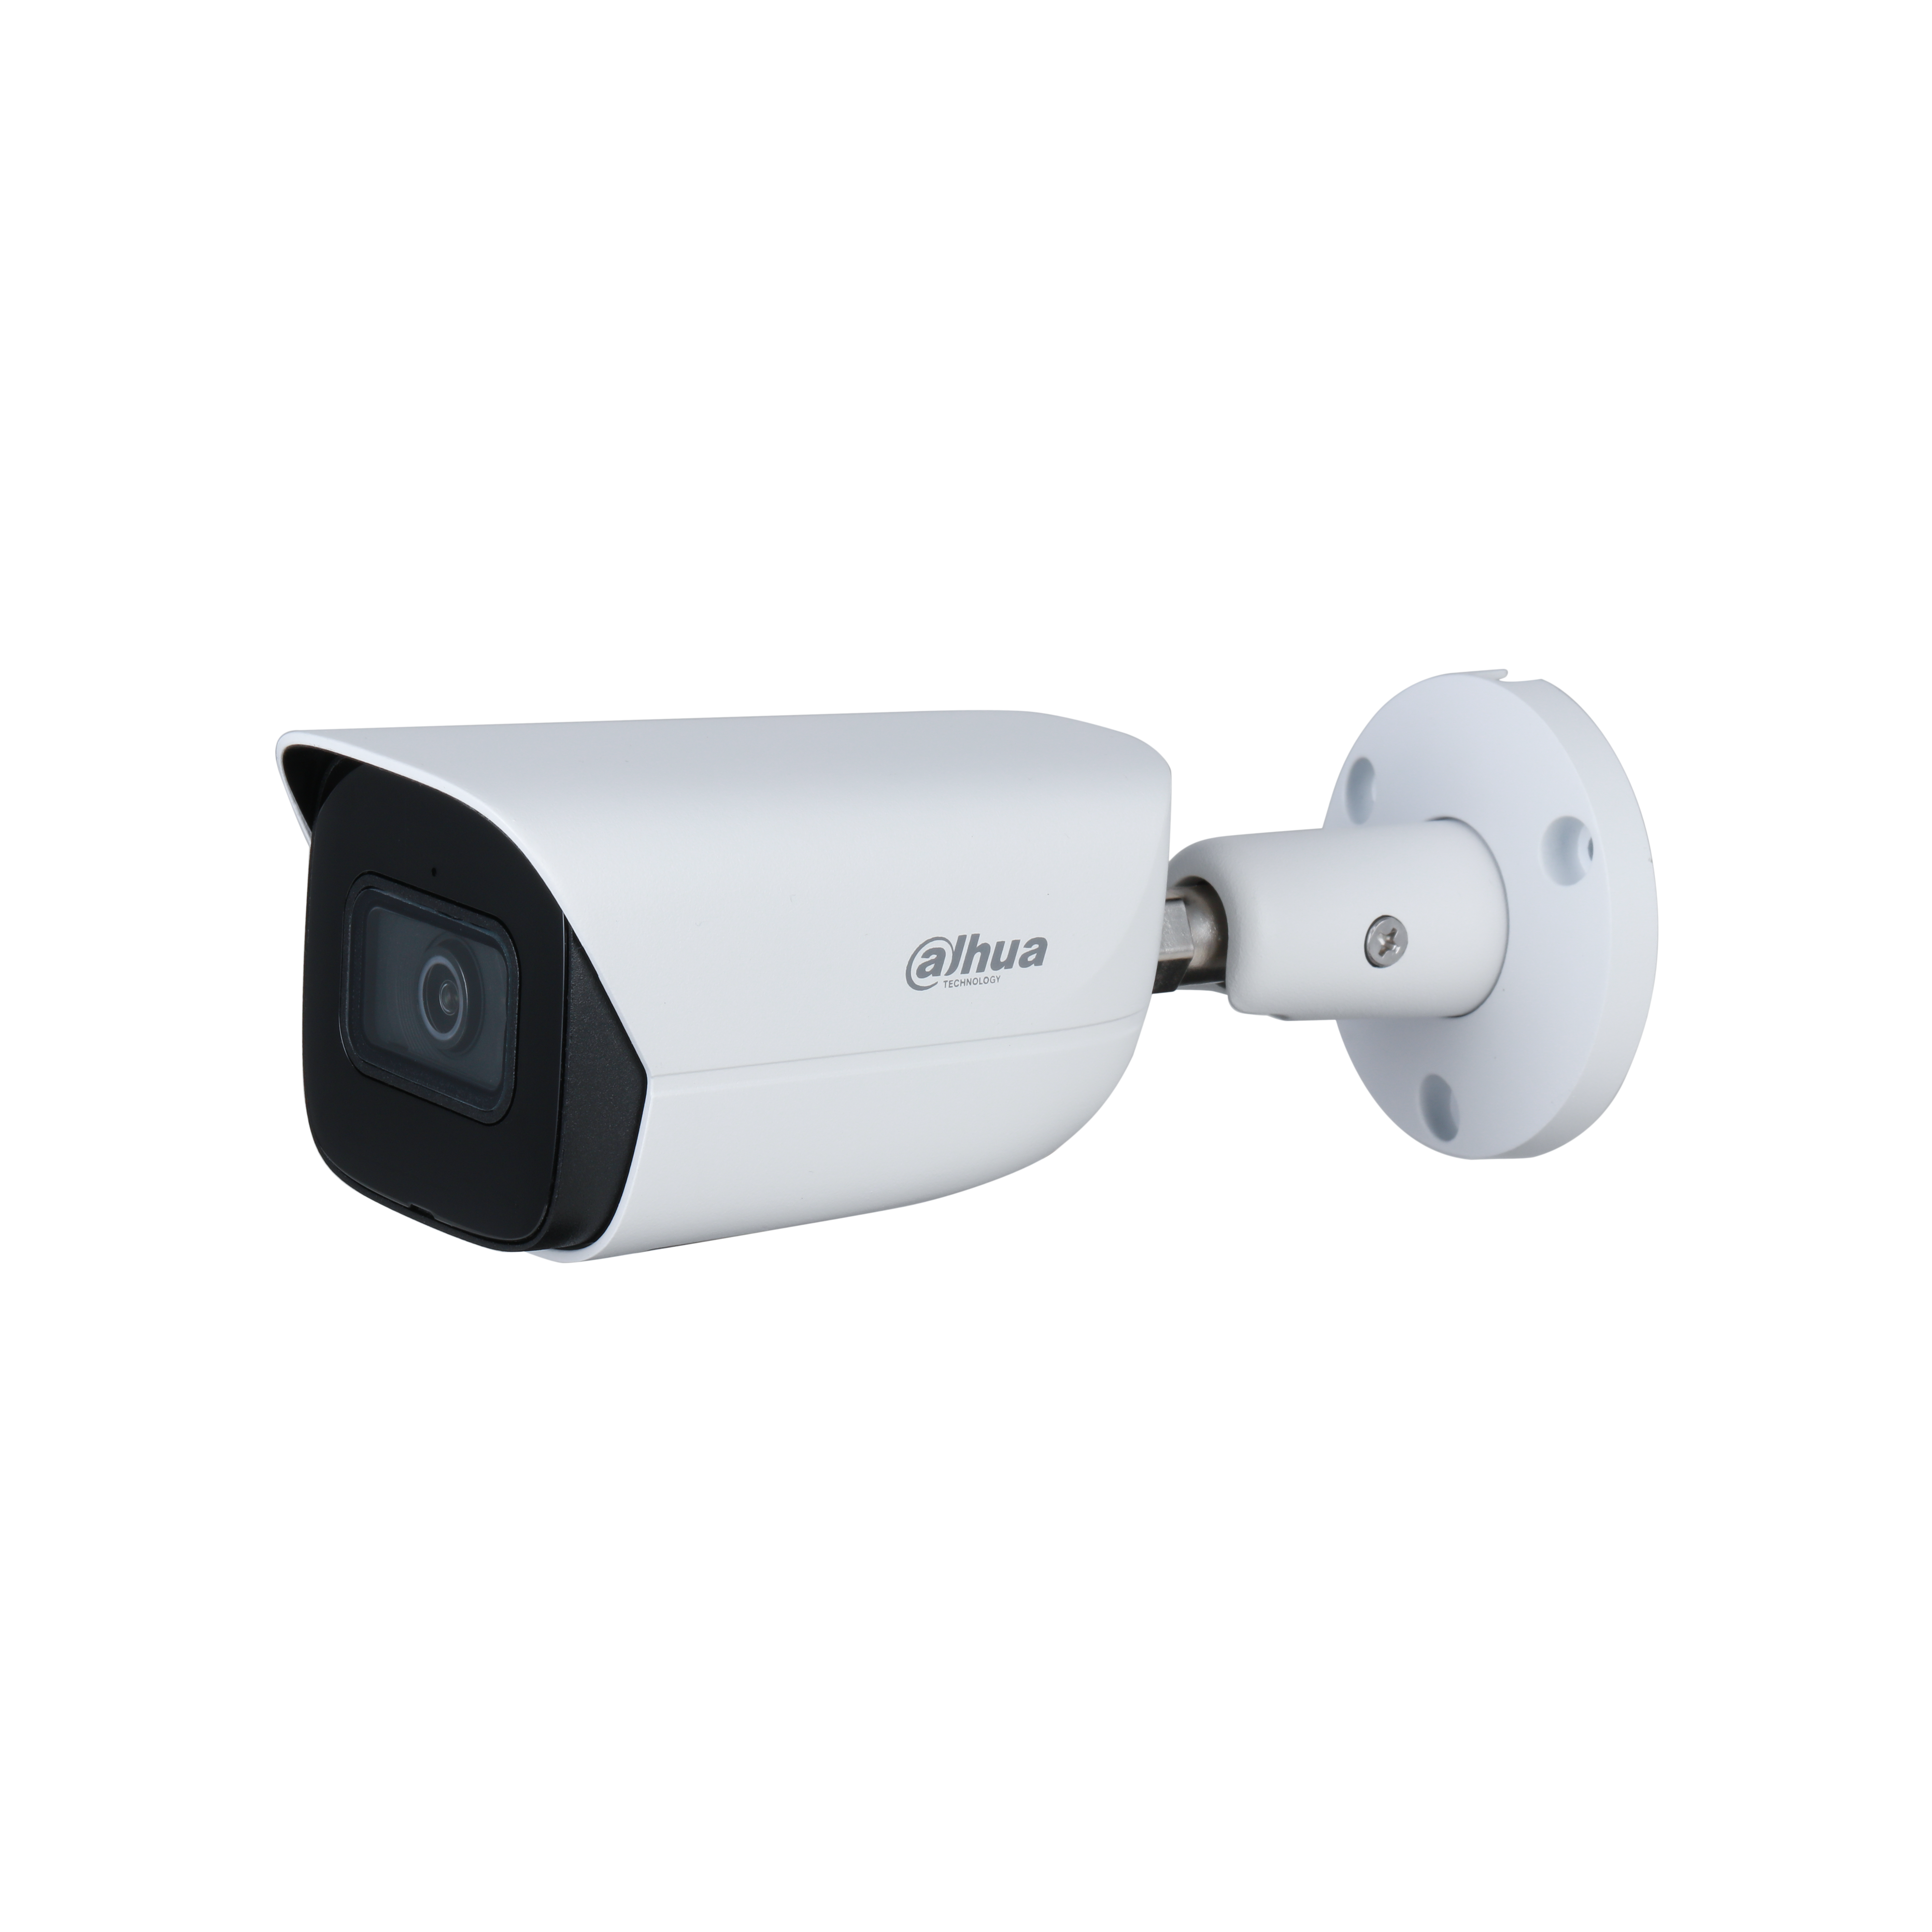 WIZSENSE SERIES IP CAMERA WHITE 8MP/4K H.264/4+/5/5+ BULLET 120 WDR METAL 2.8MM FIXED LENS STARLIGHT IR 30M POE IP67 BUILT IN MIC AUDIO IN AUDIO OUT 1 x ALARM IN 1 x ALARM OUT SUPPORT UP TO 256GB SD 12VDC